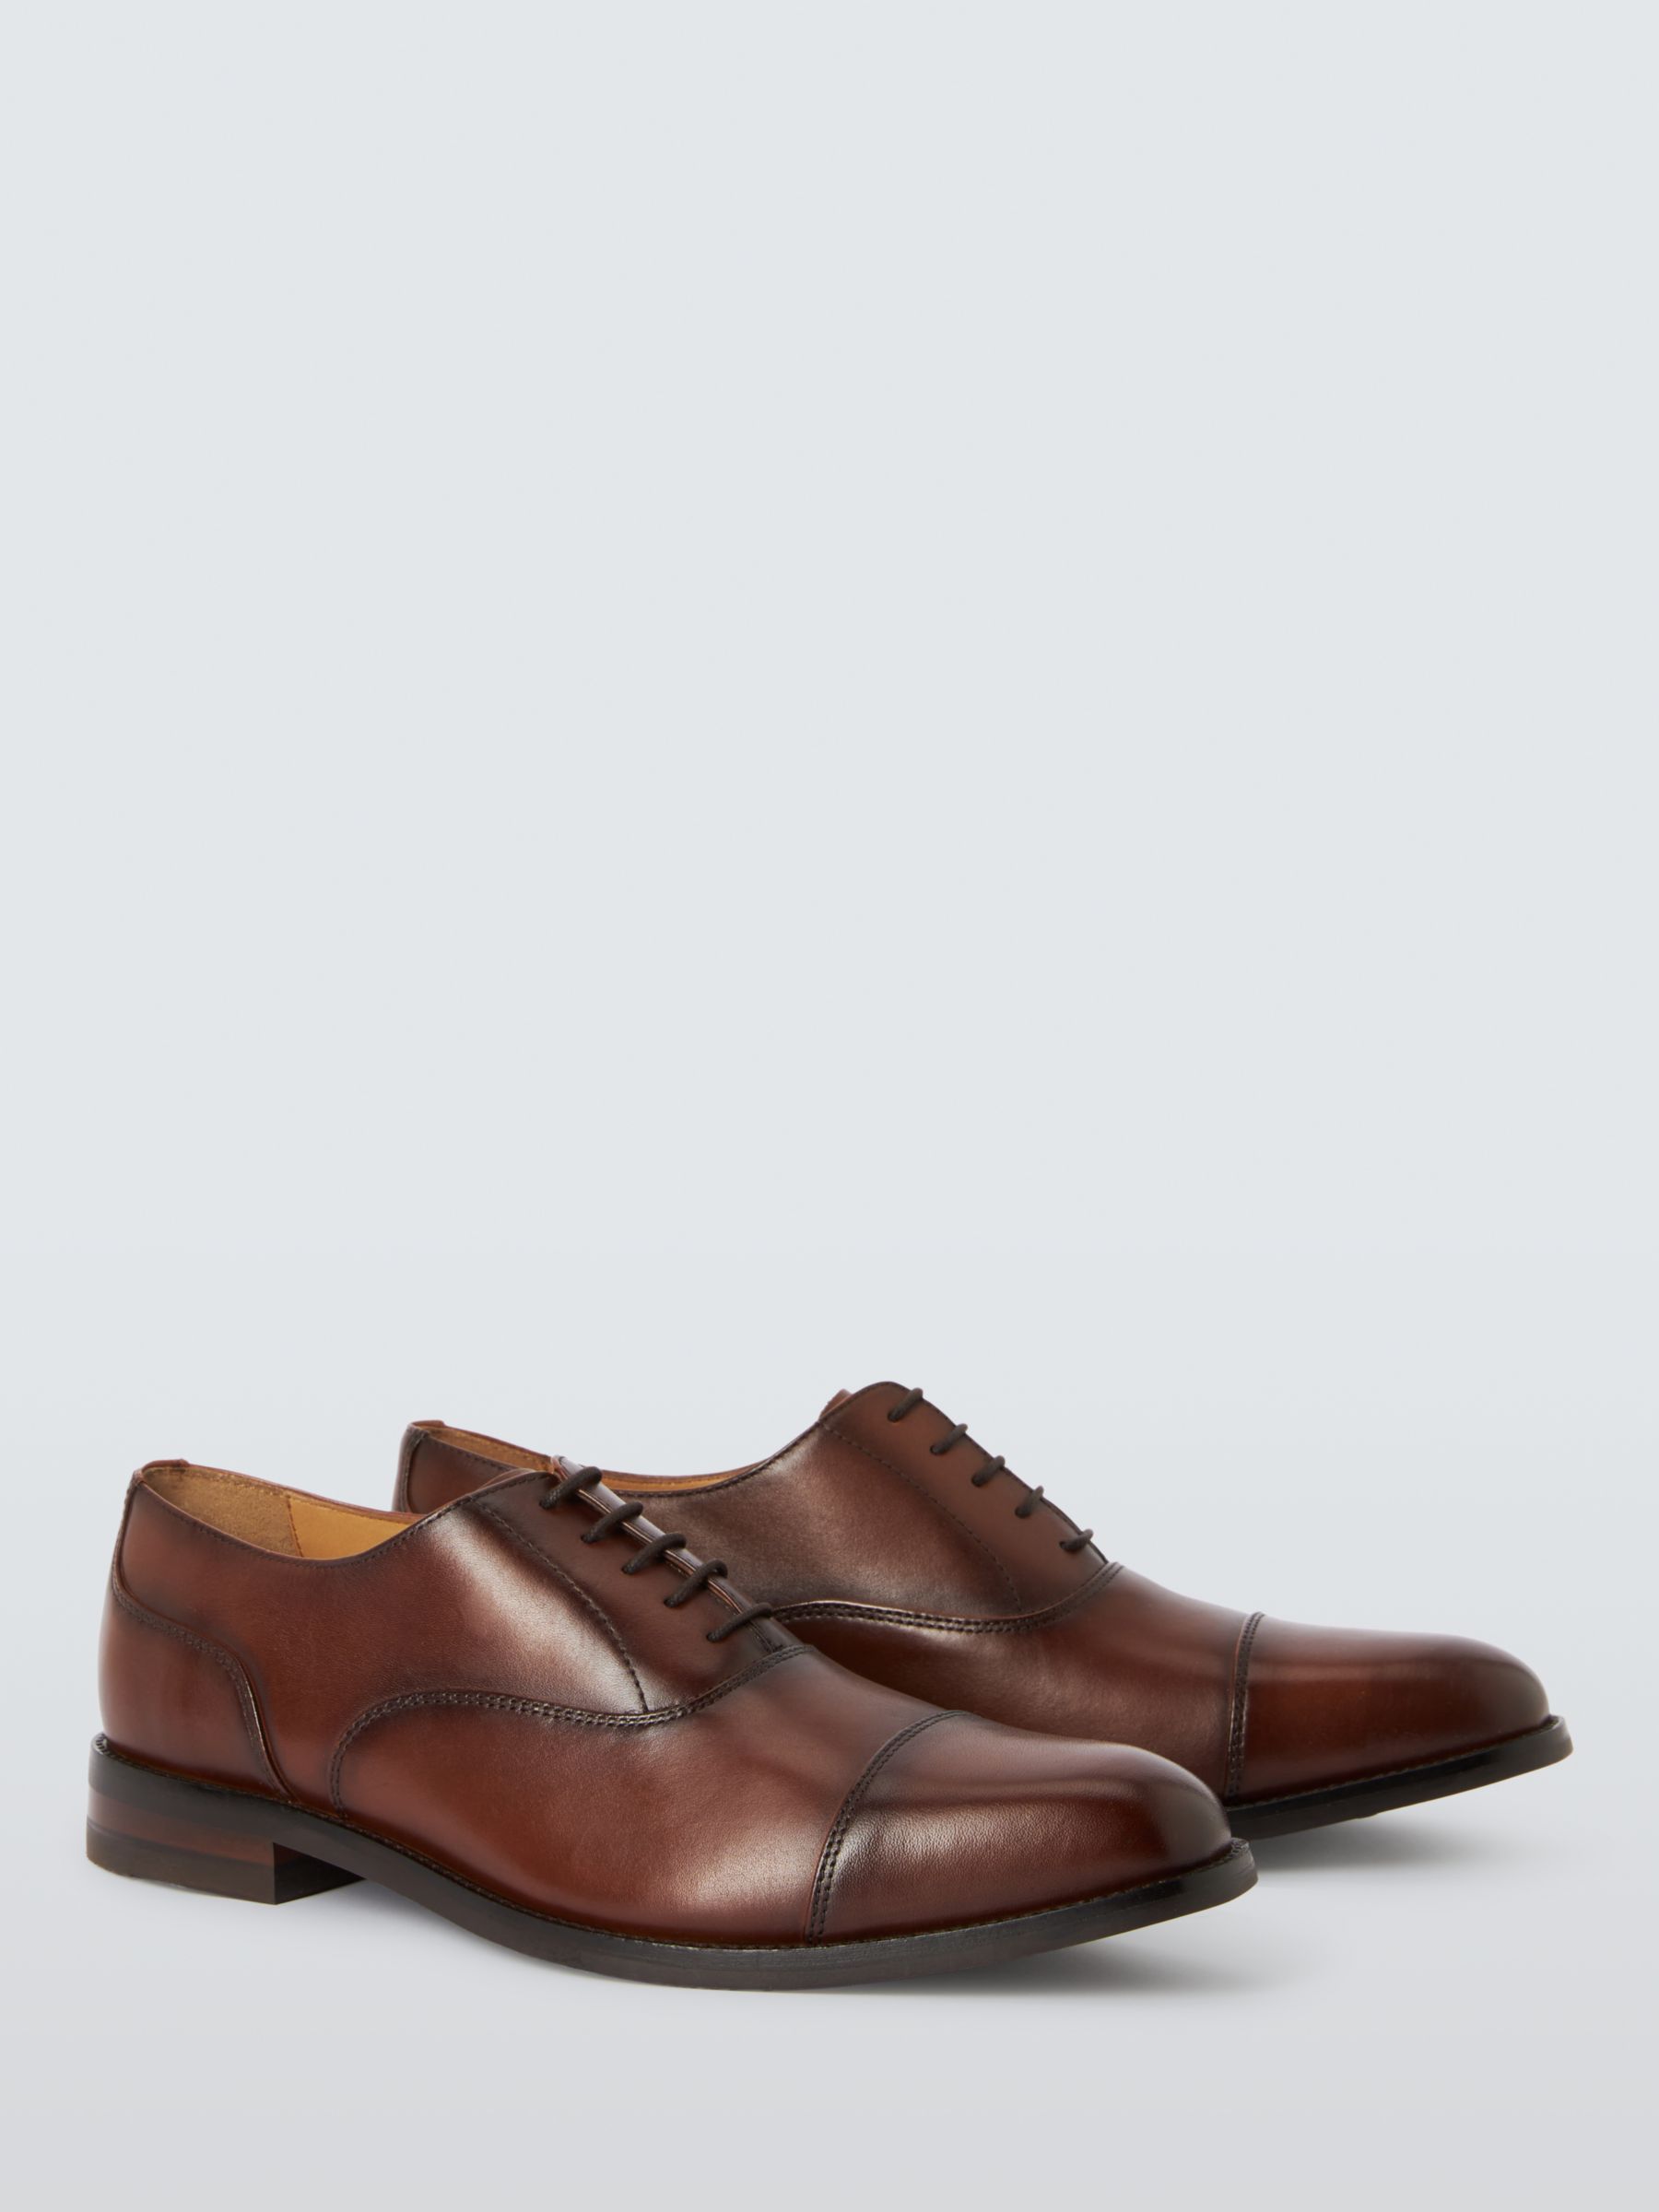 John Lewis Leather Classic Oxford Shoes, Mid Brown, 8